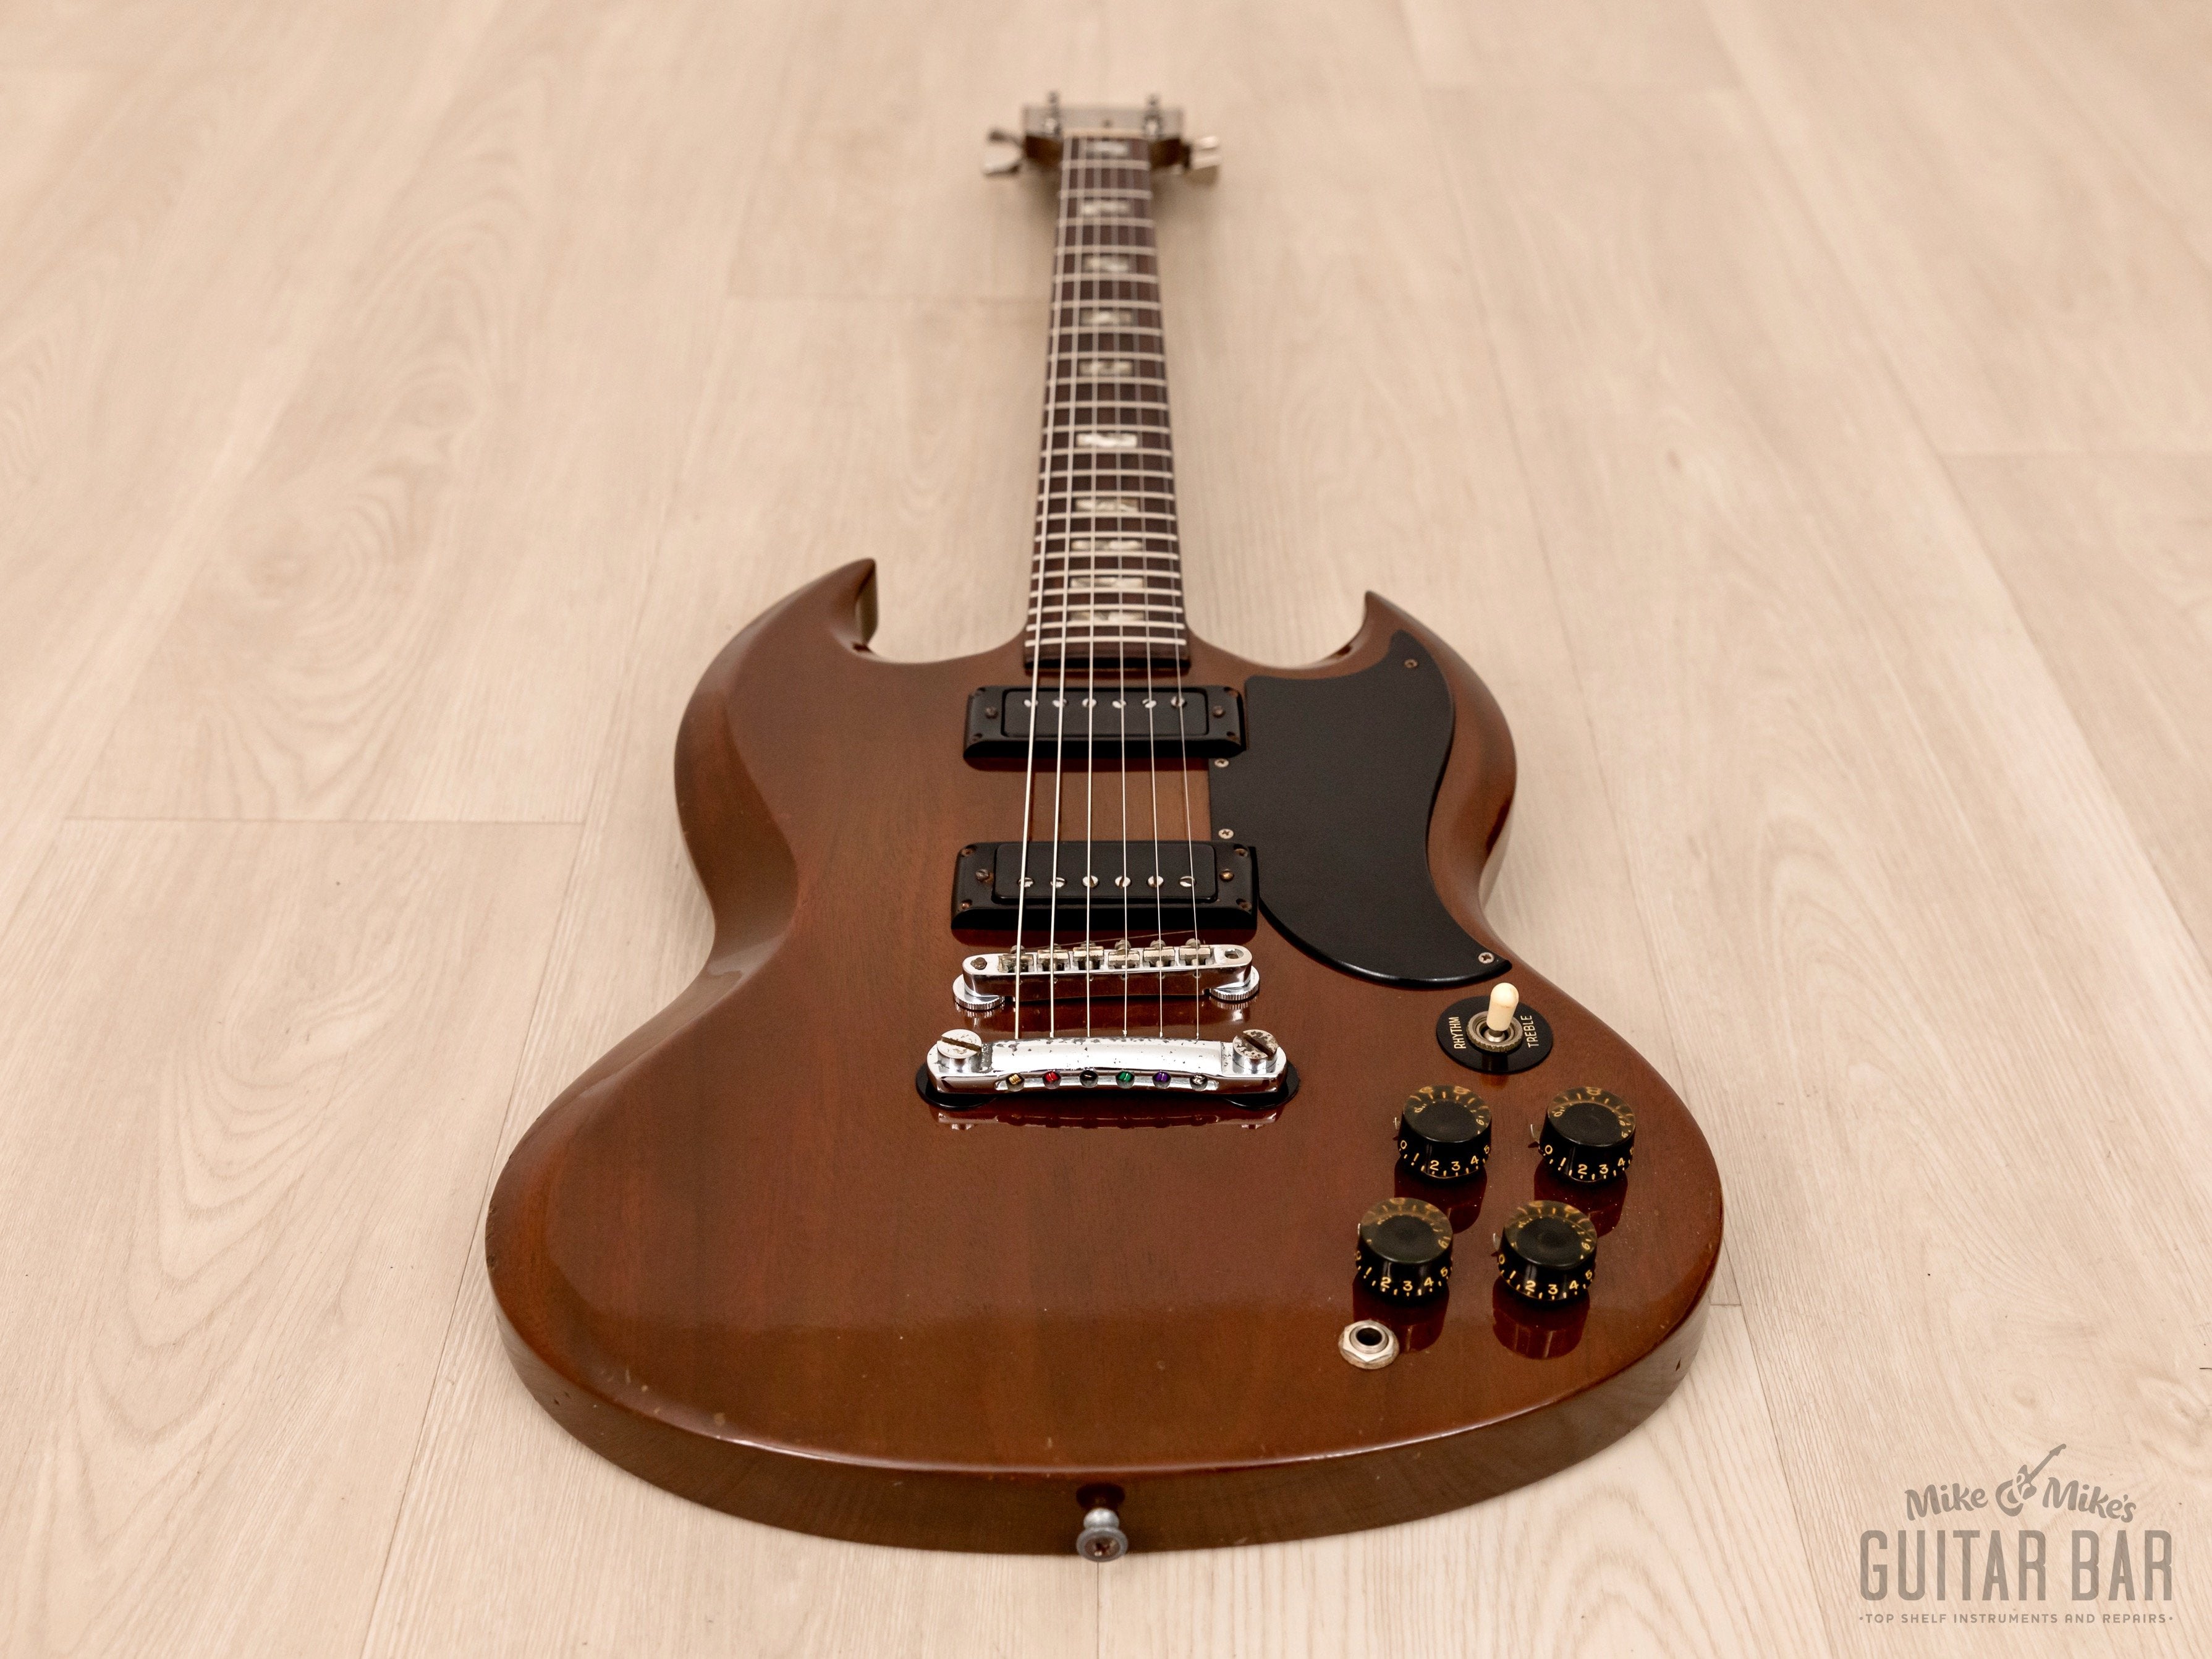 1973 Gibson SG Special Vintage Electric Guitar Walnut w/ Pat # Mini Humbuckers, Case